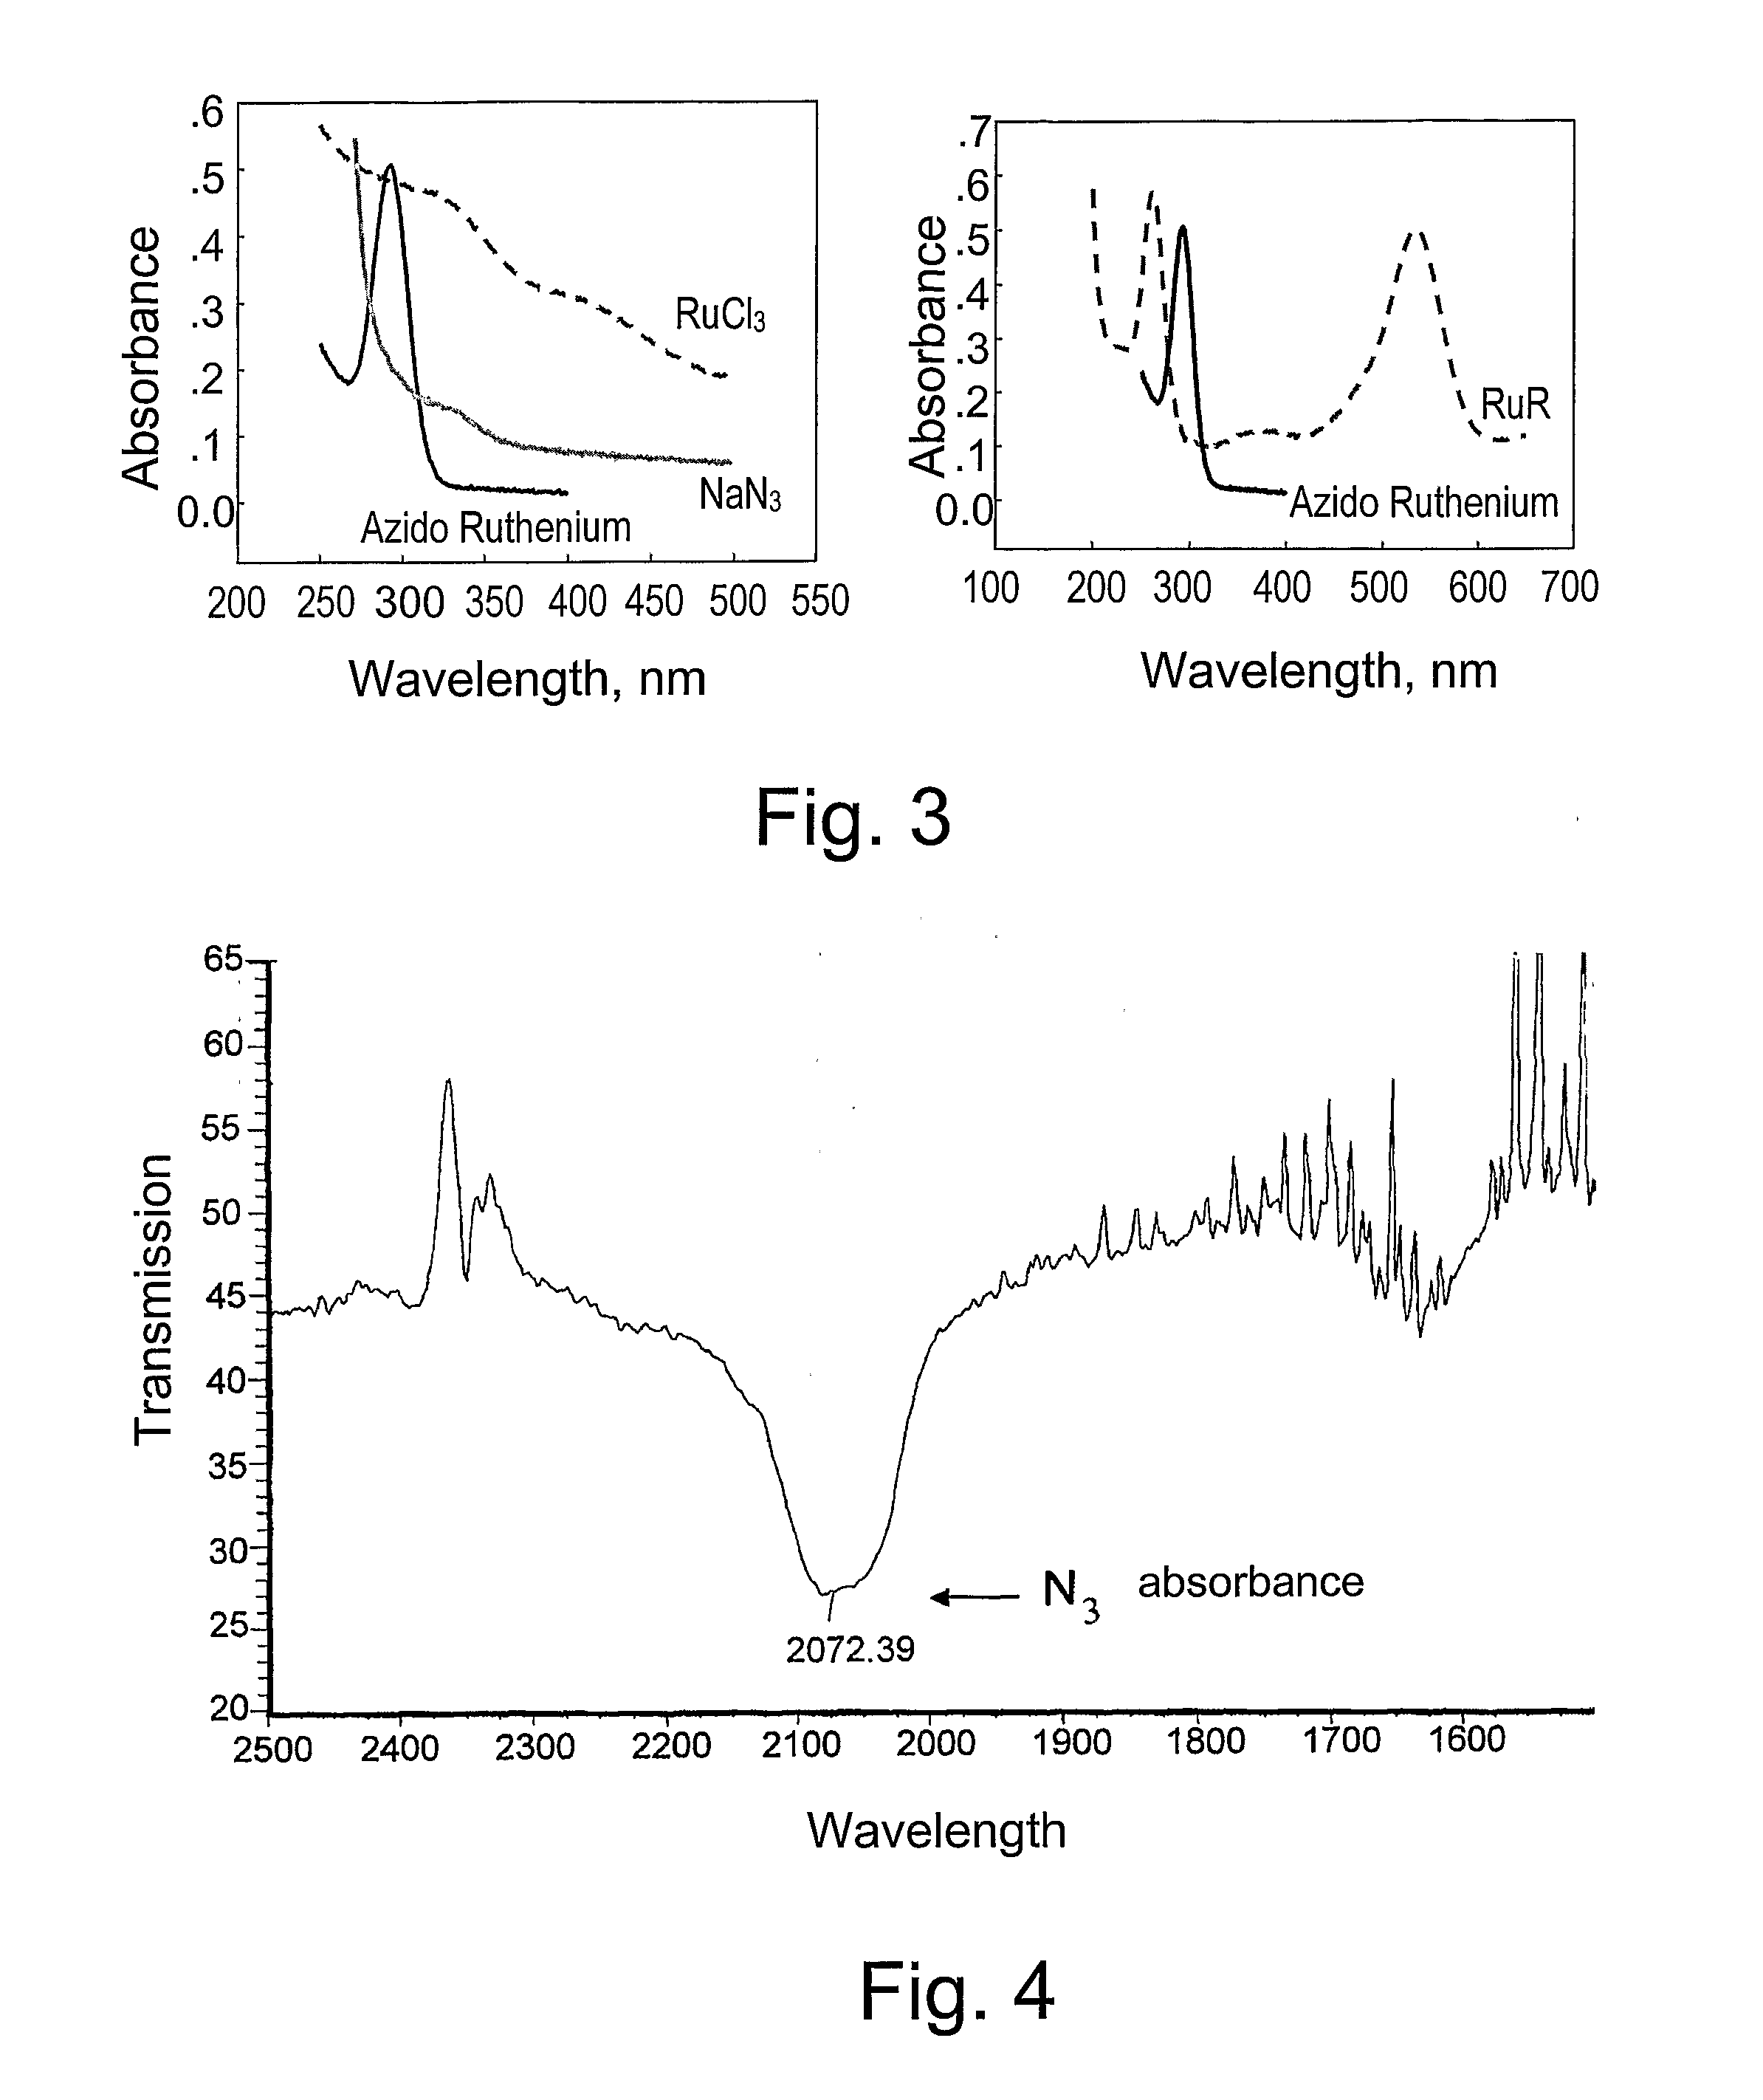 Photoreactive Compound Specifically Binding to Calcium Binding Proteins